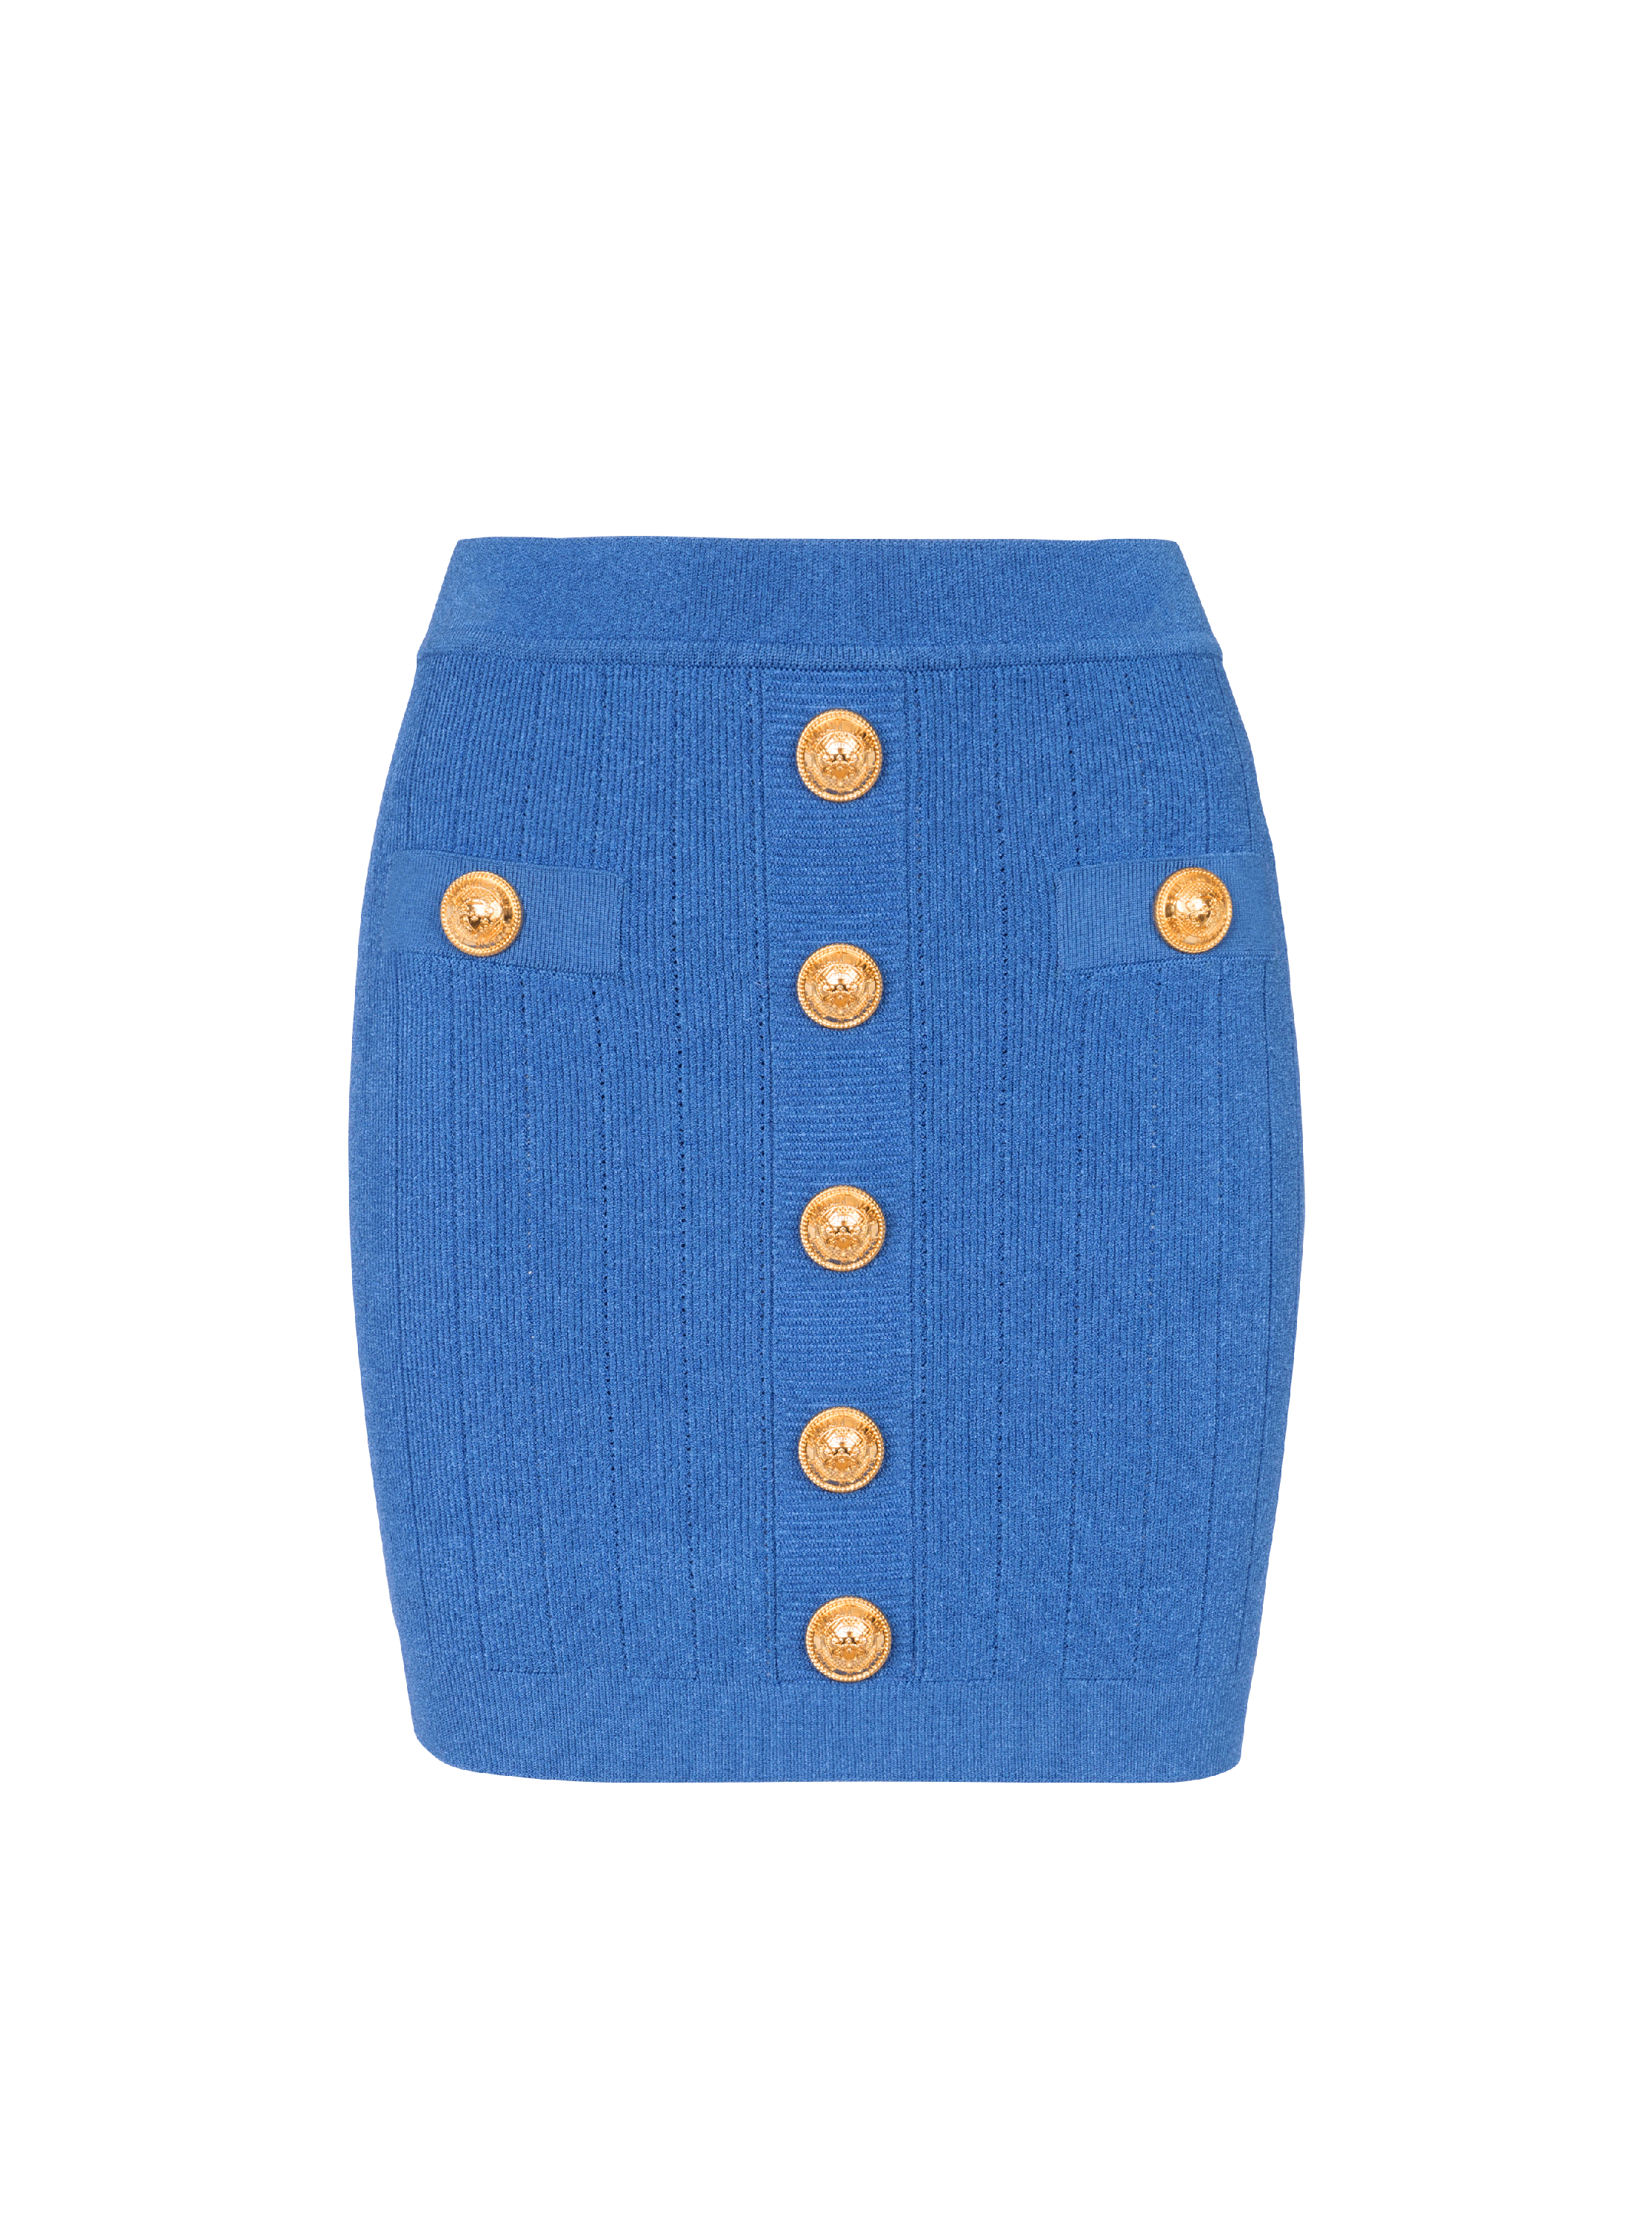 Short knitted buttoned skirt, blue, hi-res